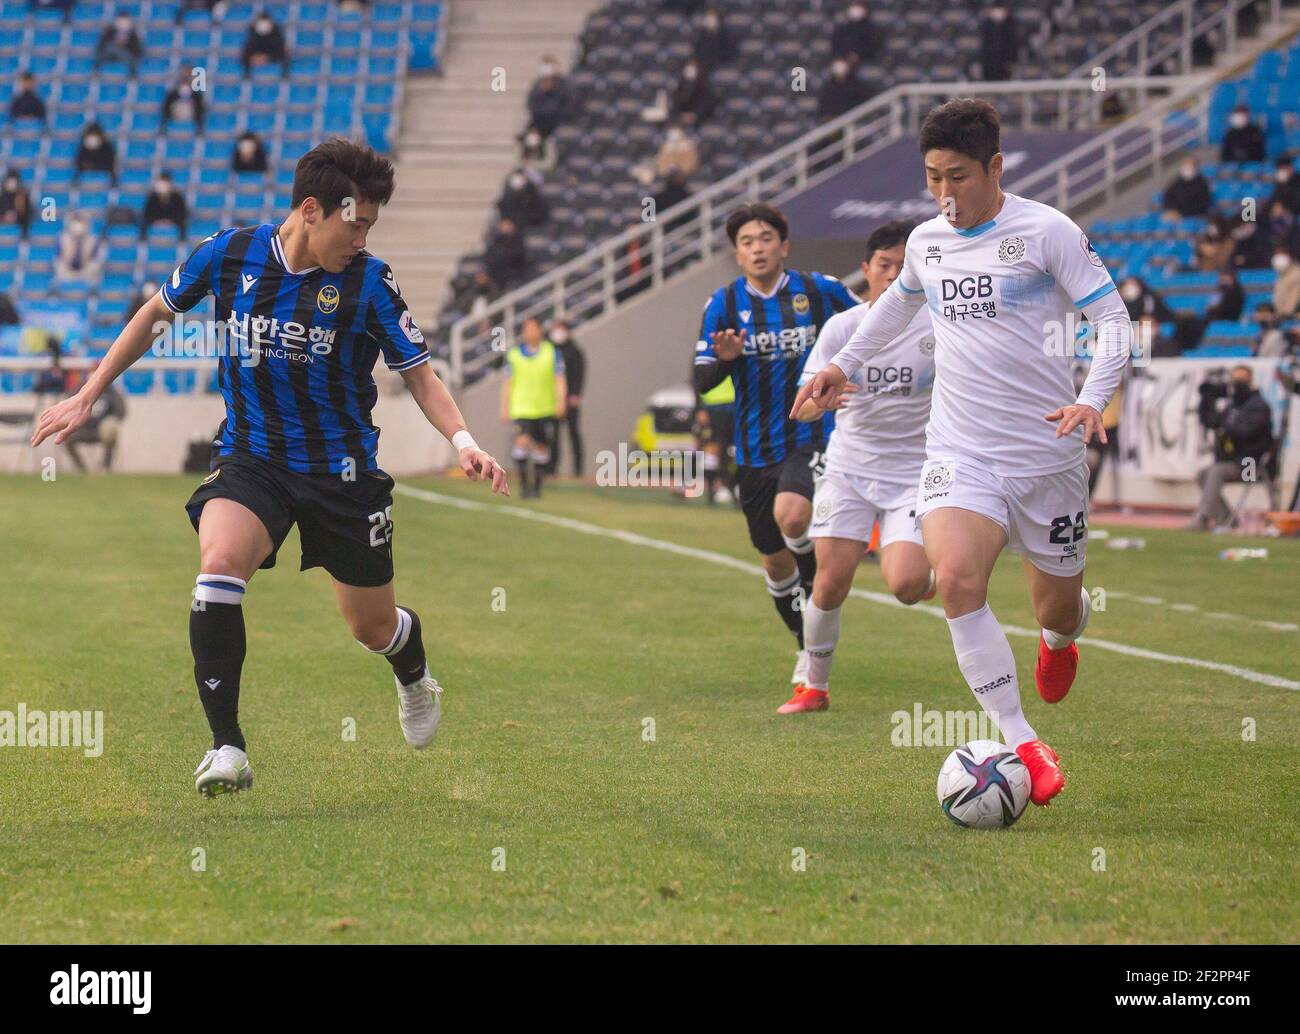 Incheon, South Korea. 06th Mar, 2021. Kim Jun-Yub (L) of Incheon United FC and Lee Keun-Ho (front R) of Daegu FC in action during the 2nd round of the 2021 K League 1 soccer match between Incheon United FC and Daegu FC at the Incheon Football Stadium.(Final score; Incheon United FC 2:1 Daegu FC) Credit: SOPA Images Limited/Alamy Live News Stock Photo